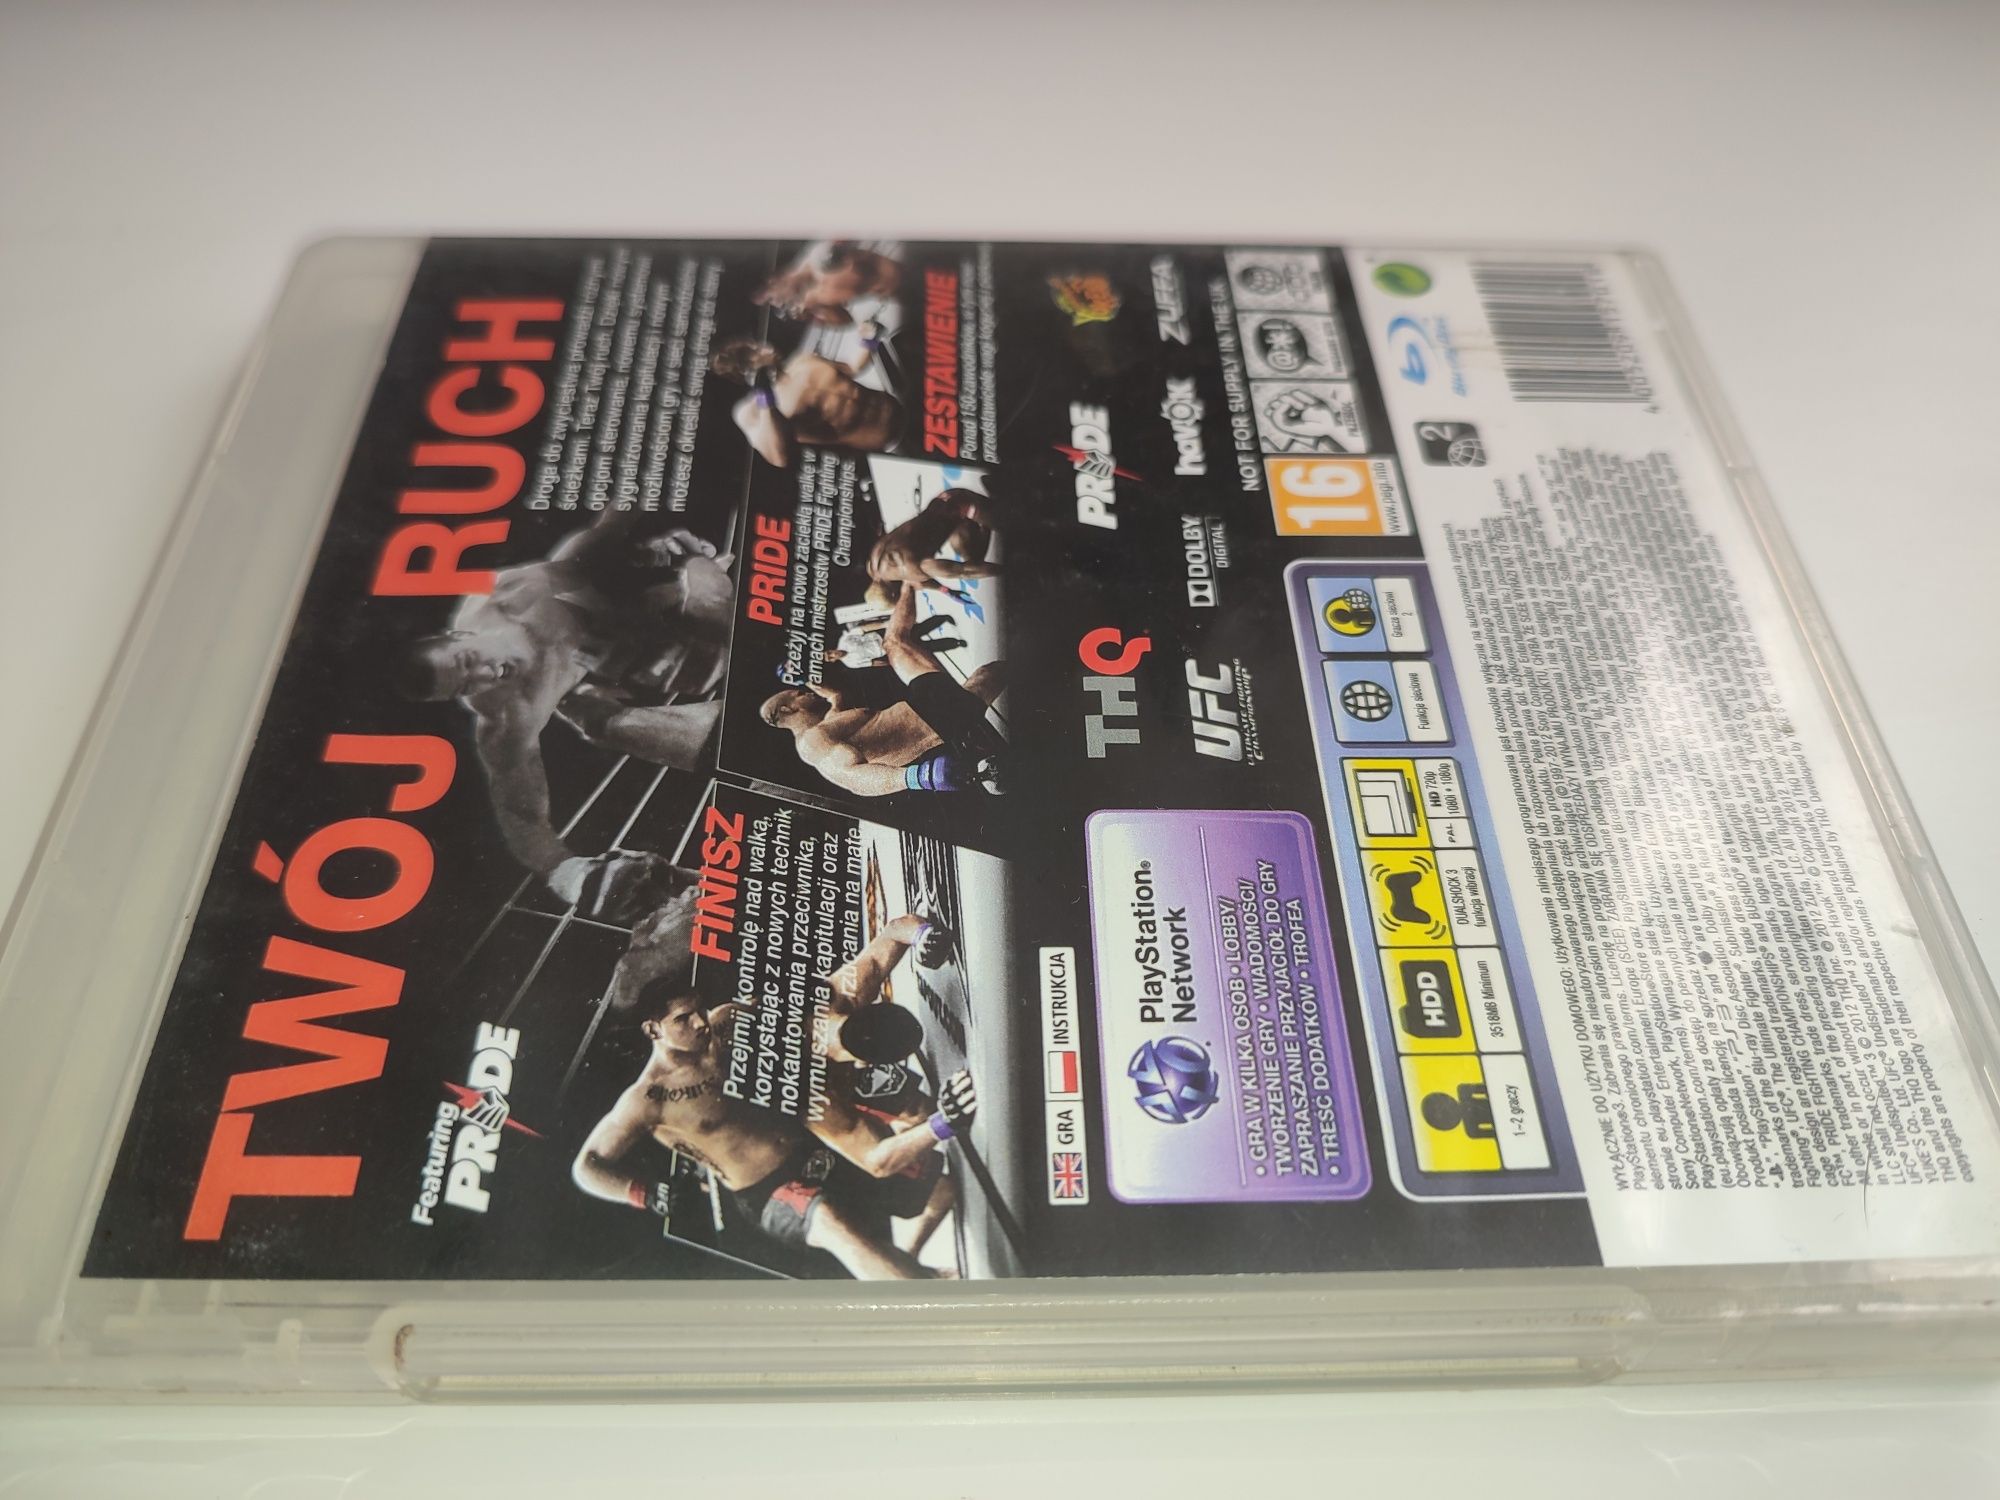 Gra Ps3 UFC3 Undisputed MMA Boks gry PlayStation 3 Hit UFC